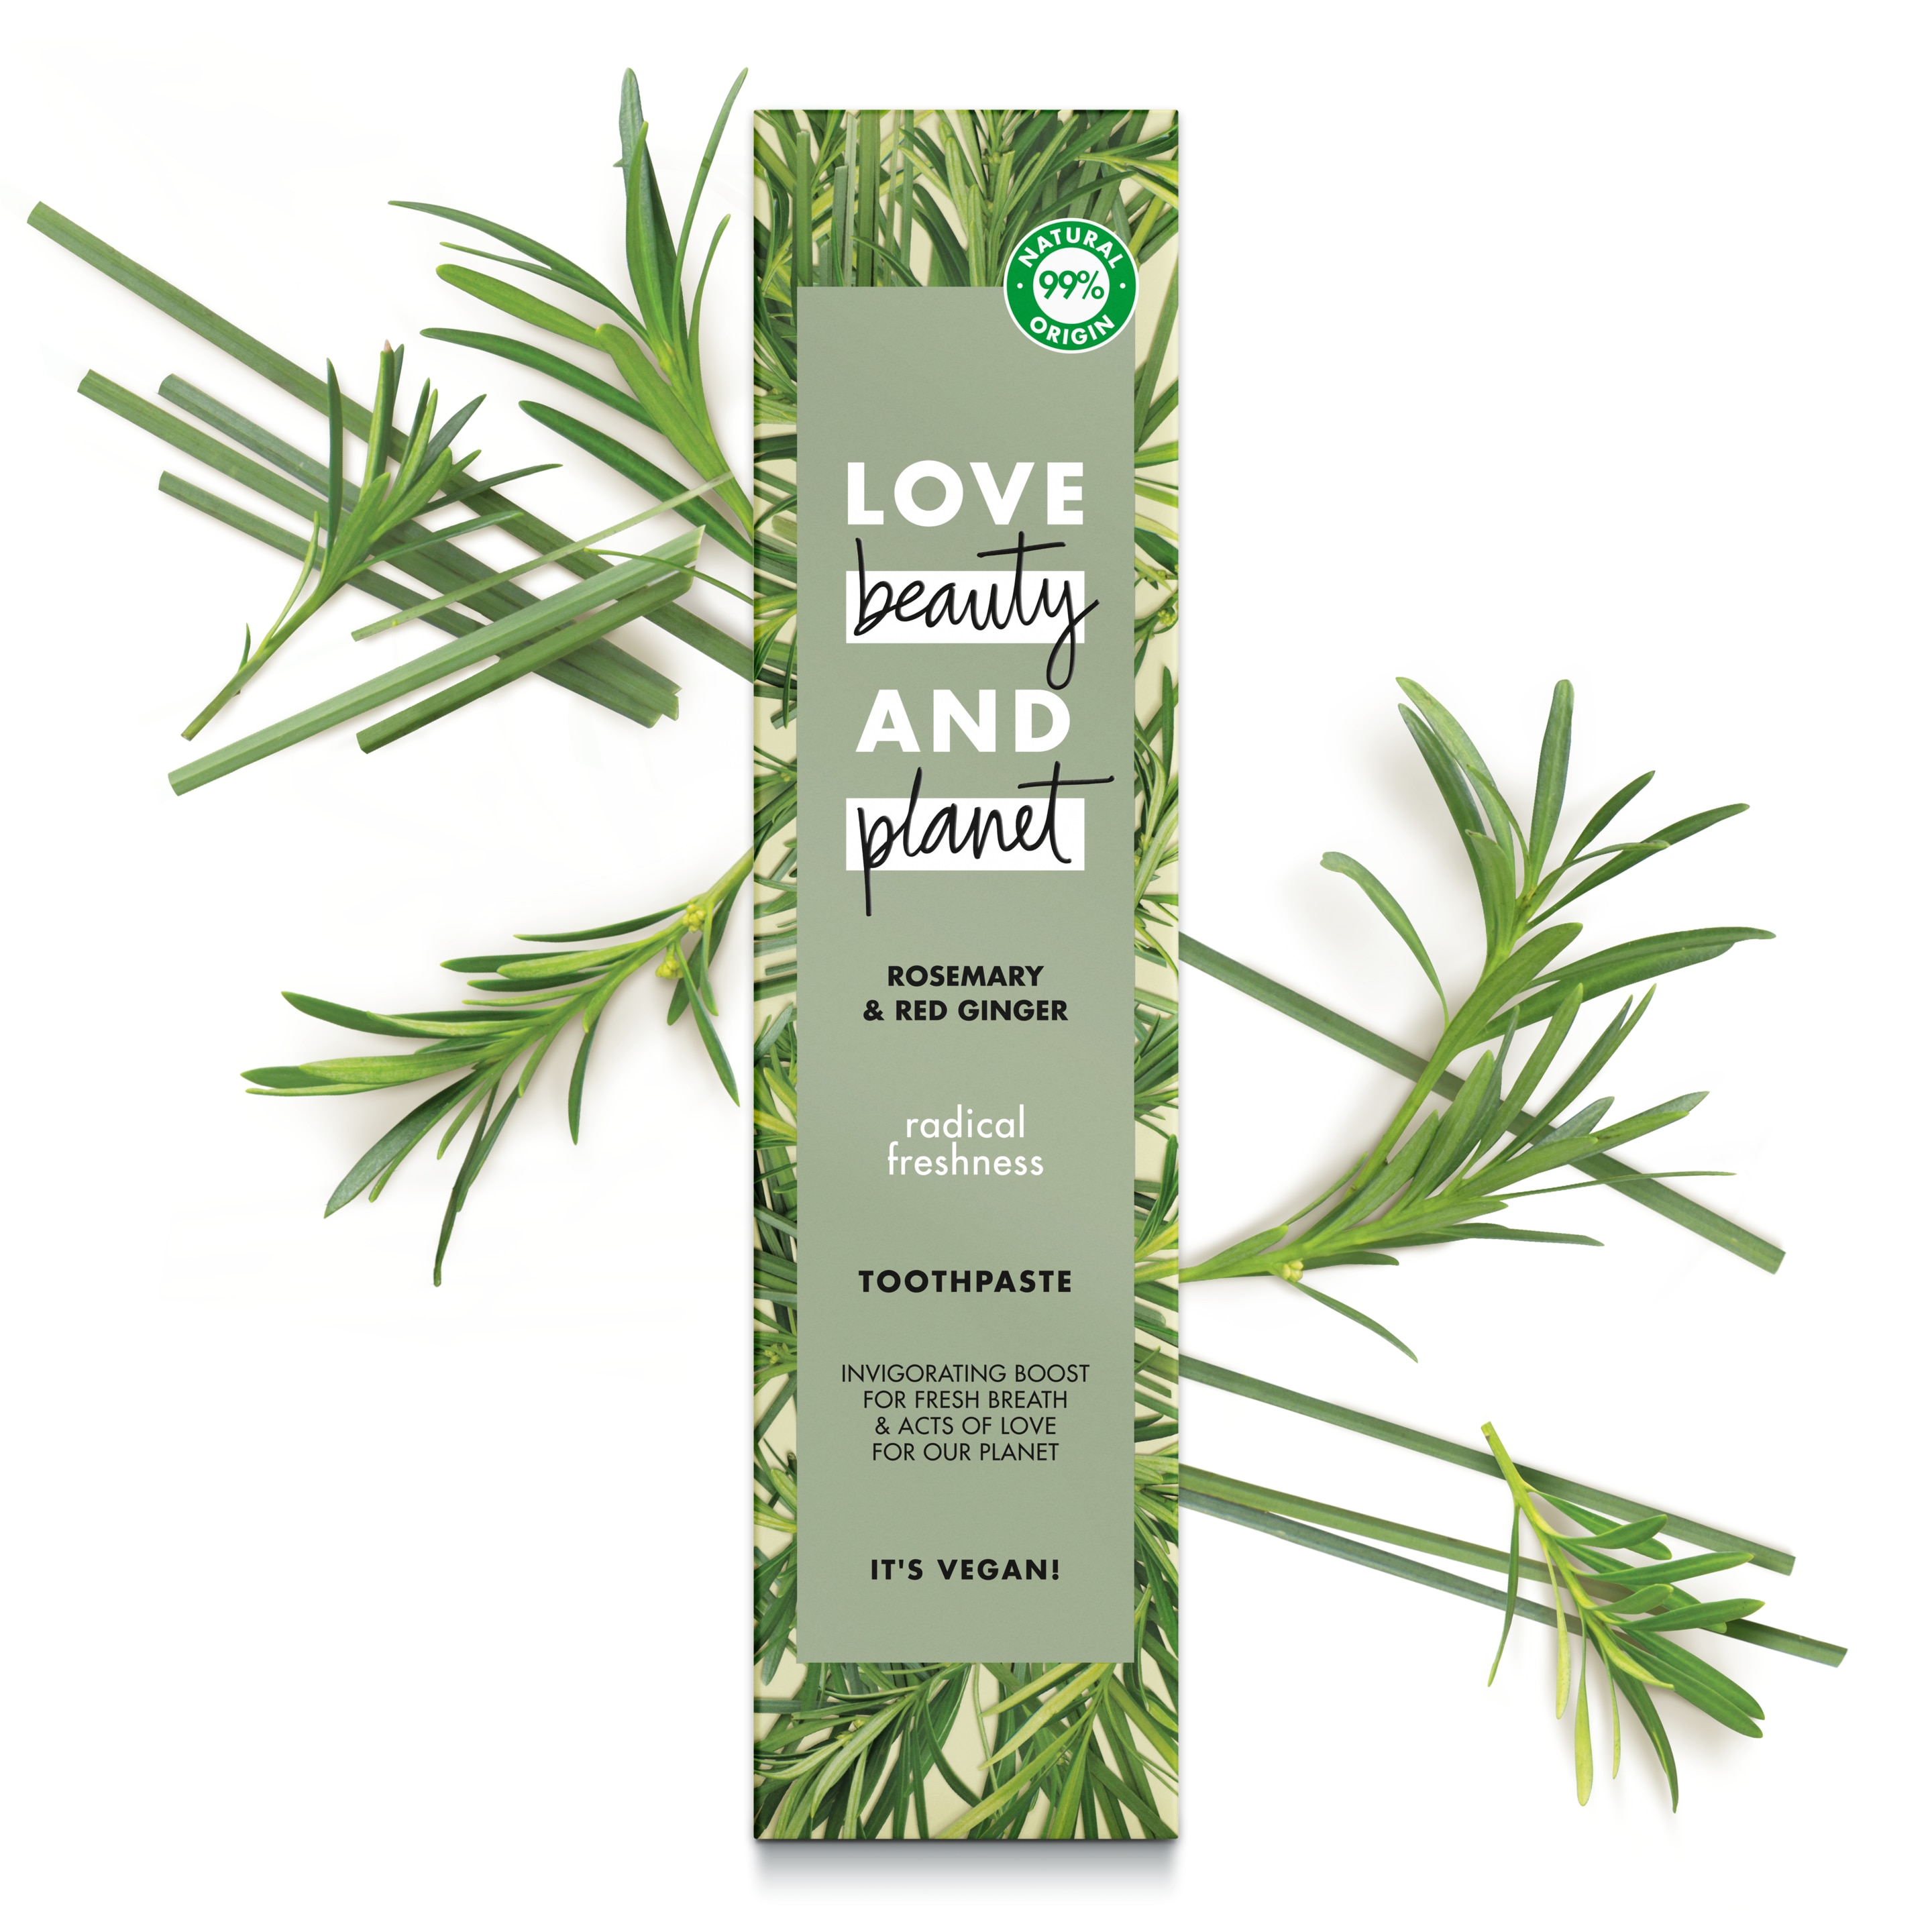 Rosemary & Red Ginger Toothpaste